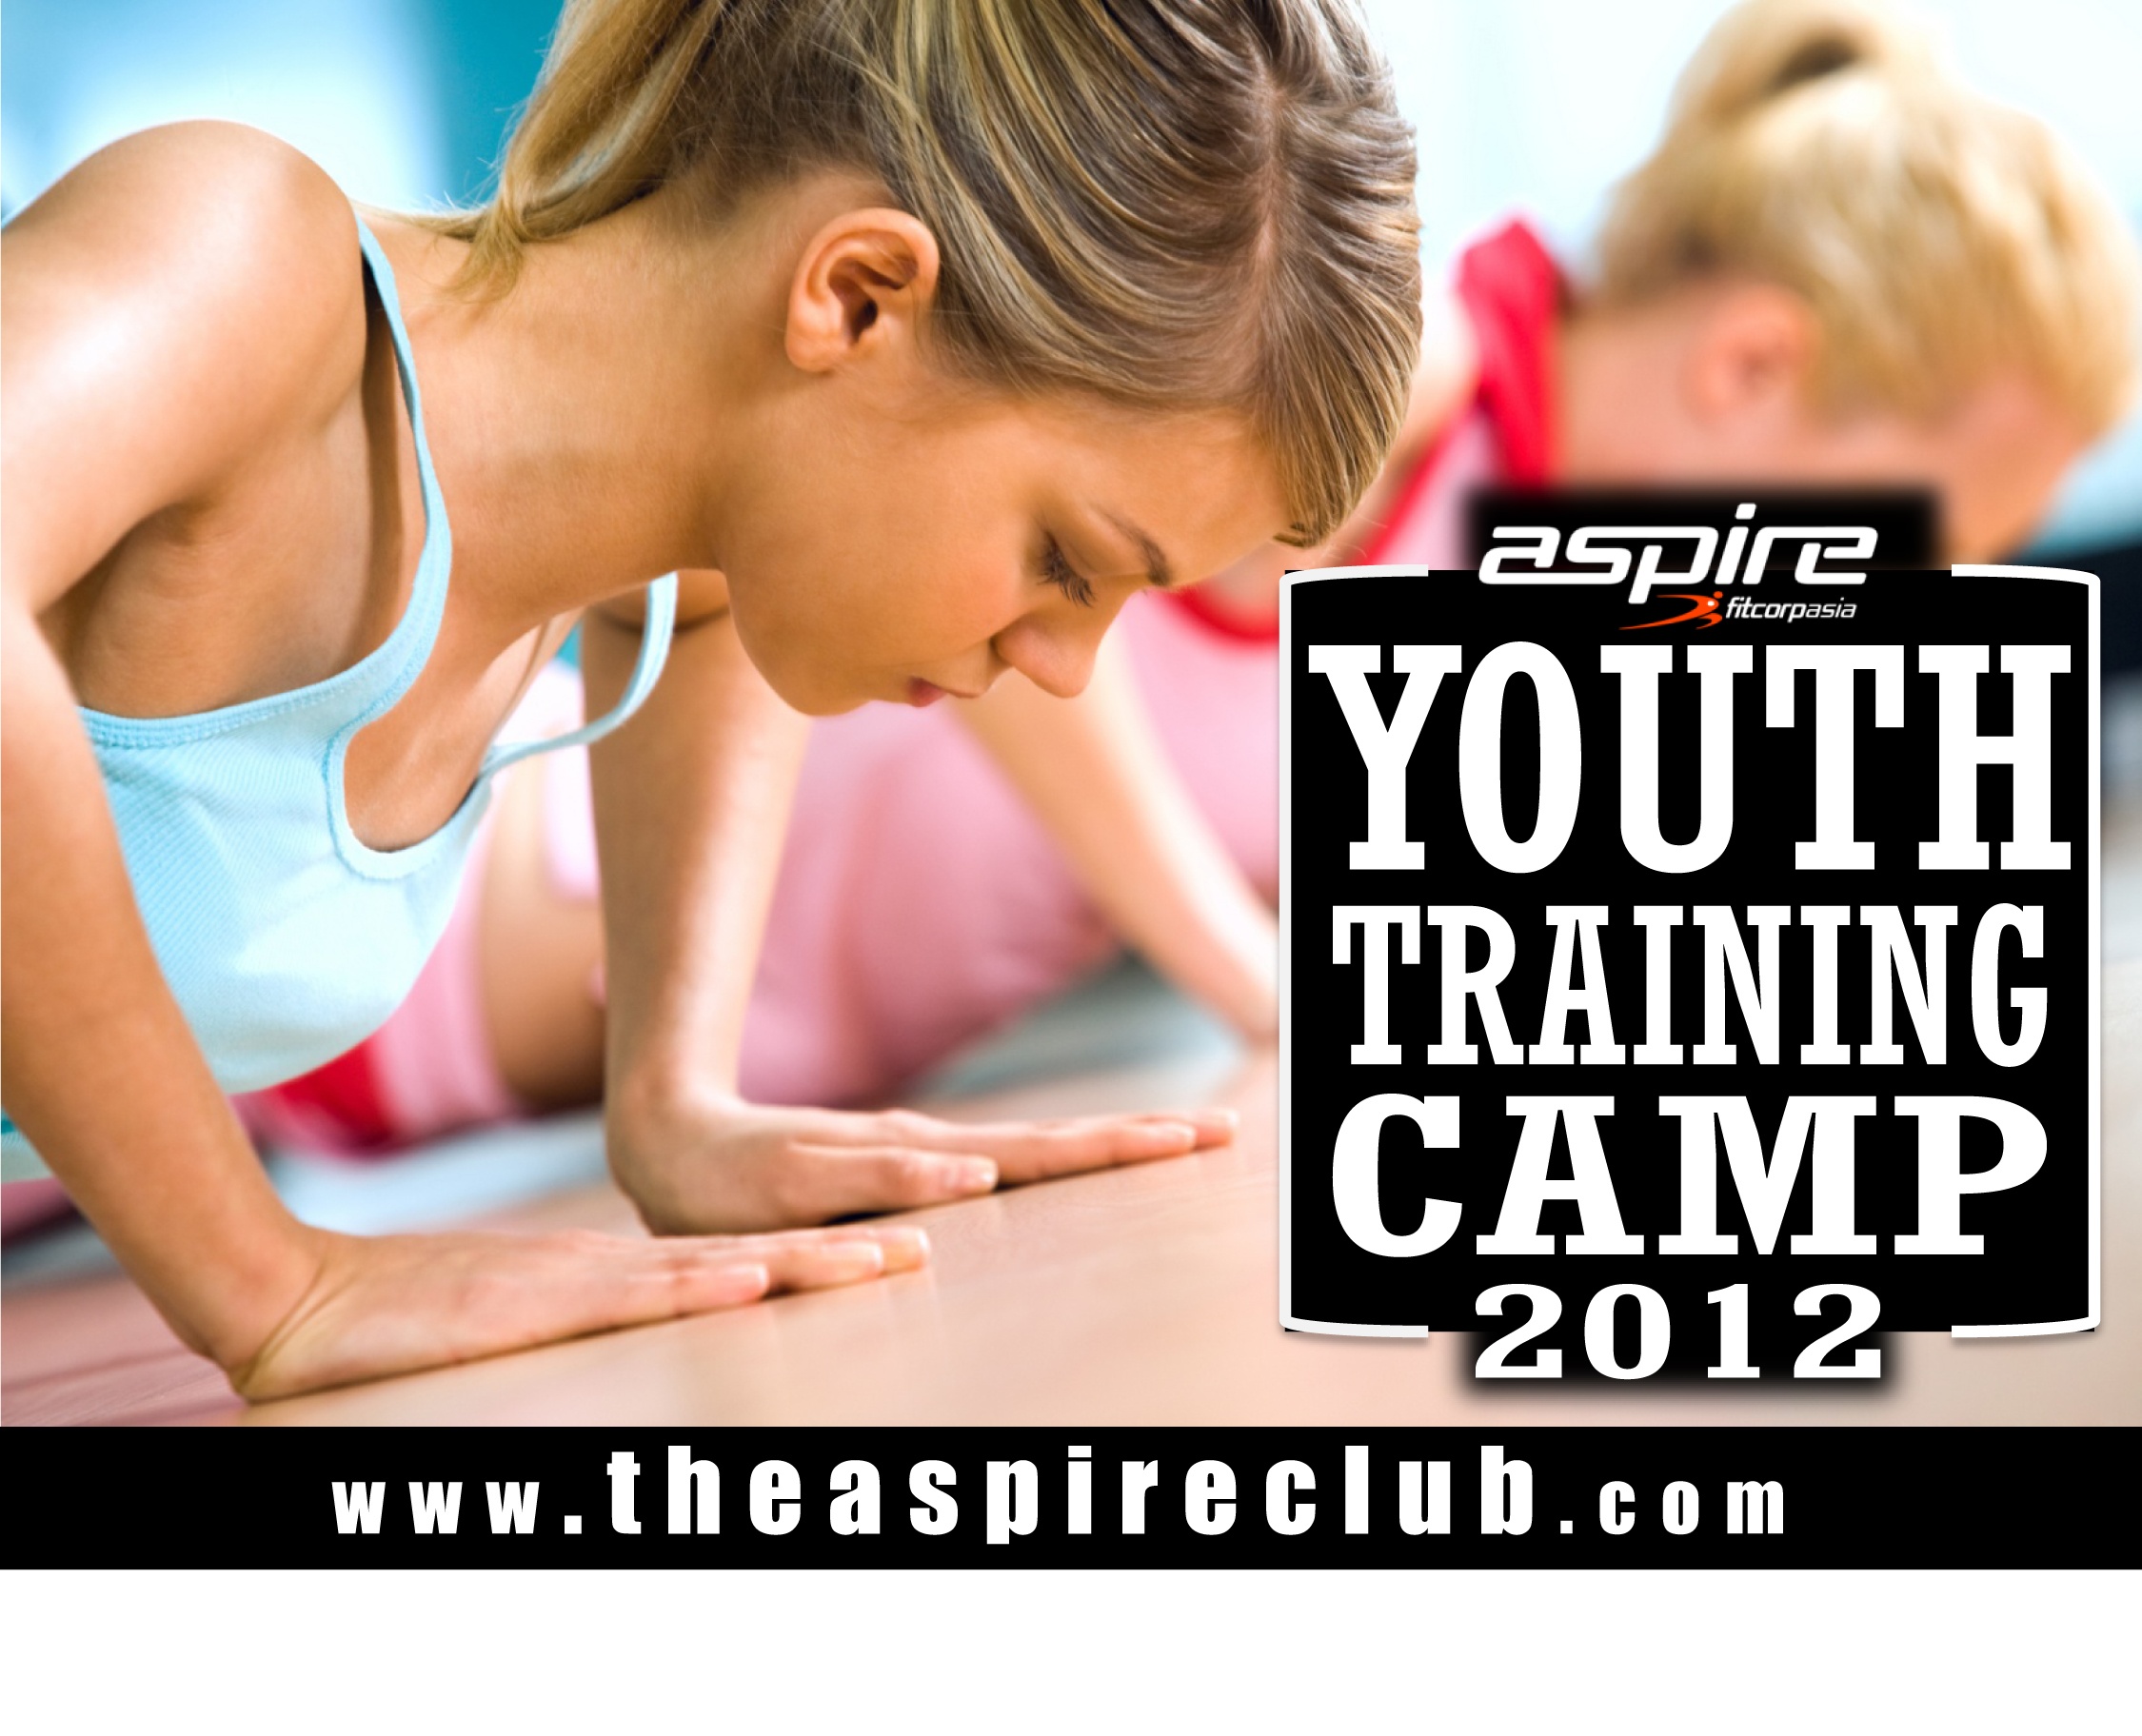 Who is in charge of the Aspire Youth Training Camp?